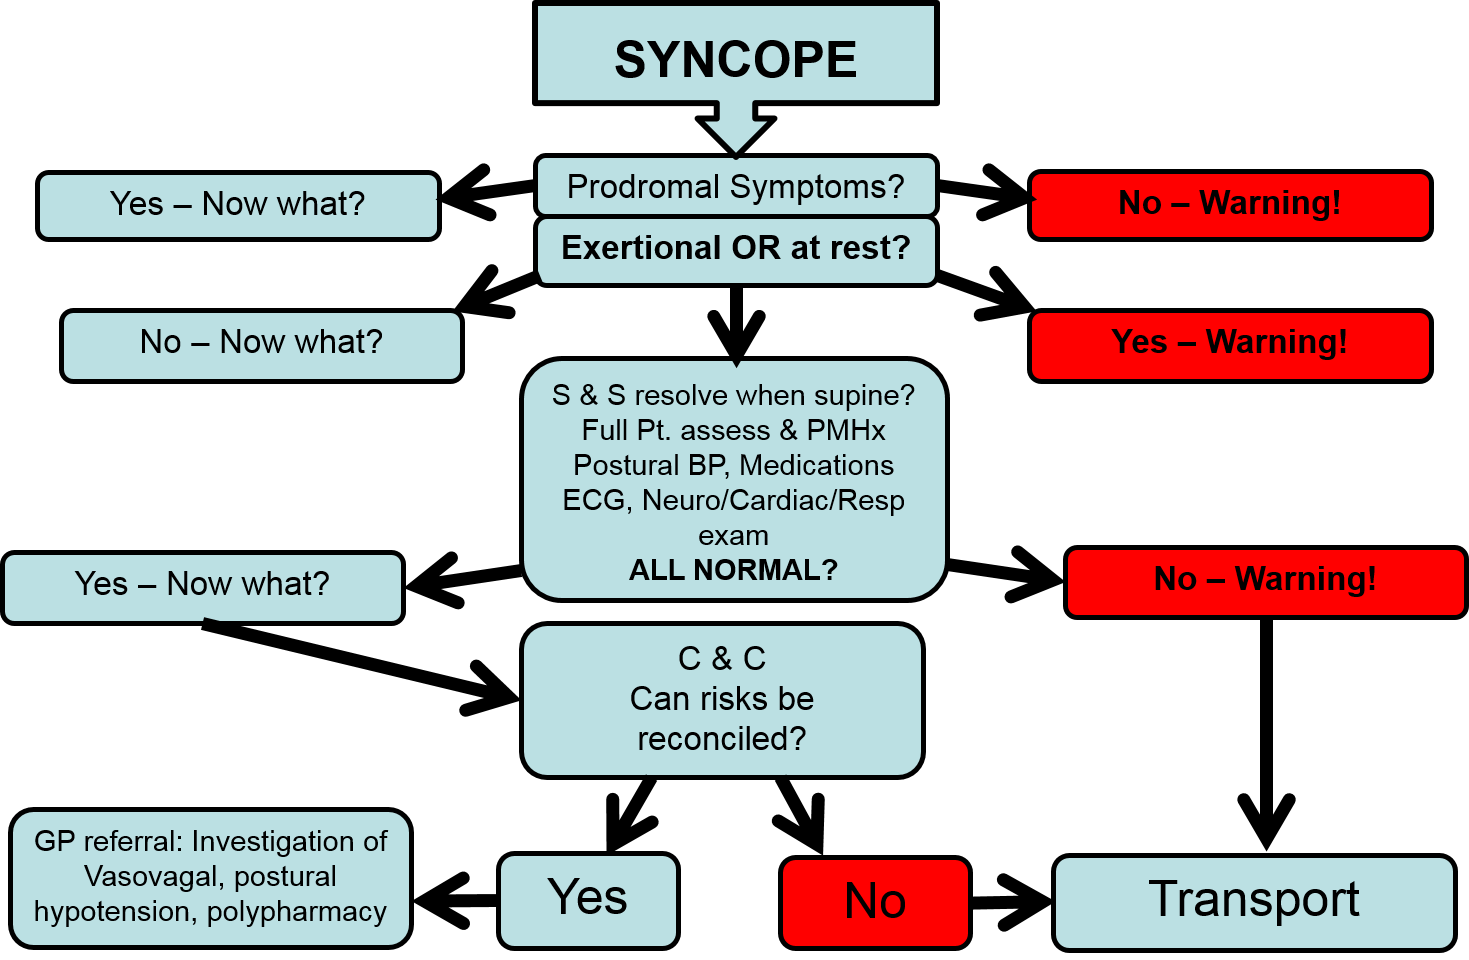 Syncope-> Prodomal Symptoms? -> No -  Warning! /-> Yes, Now what. Next level:   Exertional OR at rest? -> Yes - Warning! / -> No - Now what?; Next Level: S&S resolve when Supine?, Full Pt. assess & PMHx Postural BP, Medications EcG, Neuro/Cardiac/Resp Exam -- ALL NORMAL? -> No - warning! -> Transport. / Yes - Now what  -> Next level: C & C: Can risks be reconciled? -> NO- Transport/ Yes -> Gp referral: Investigation of Vasovagal, postural hypotension, polypharmacy